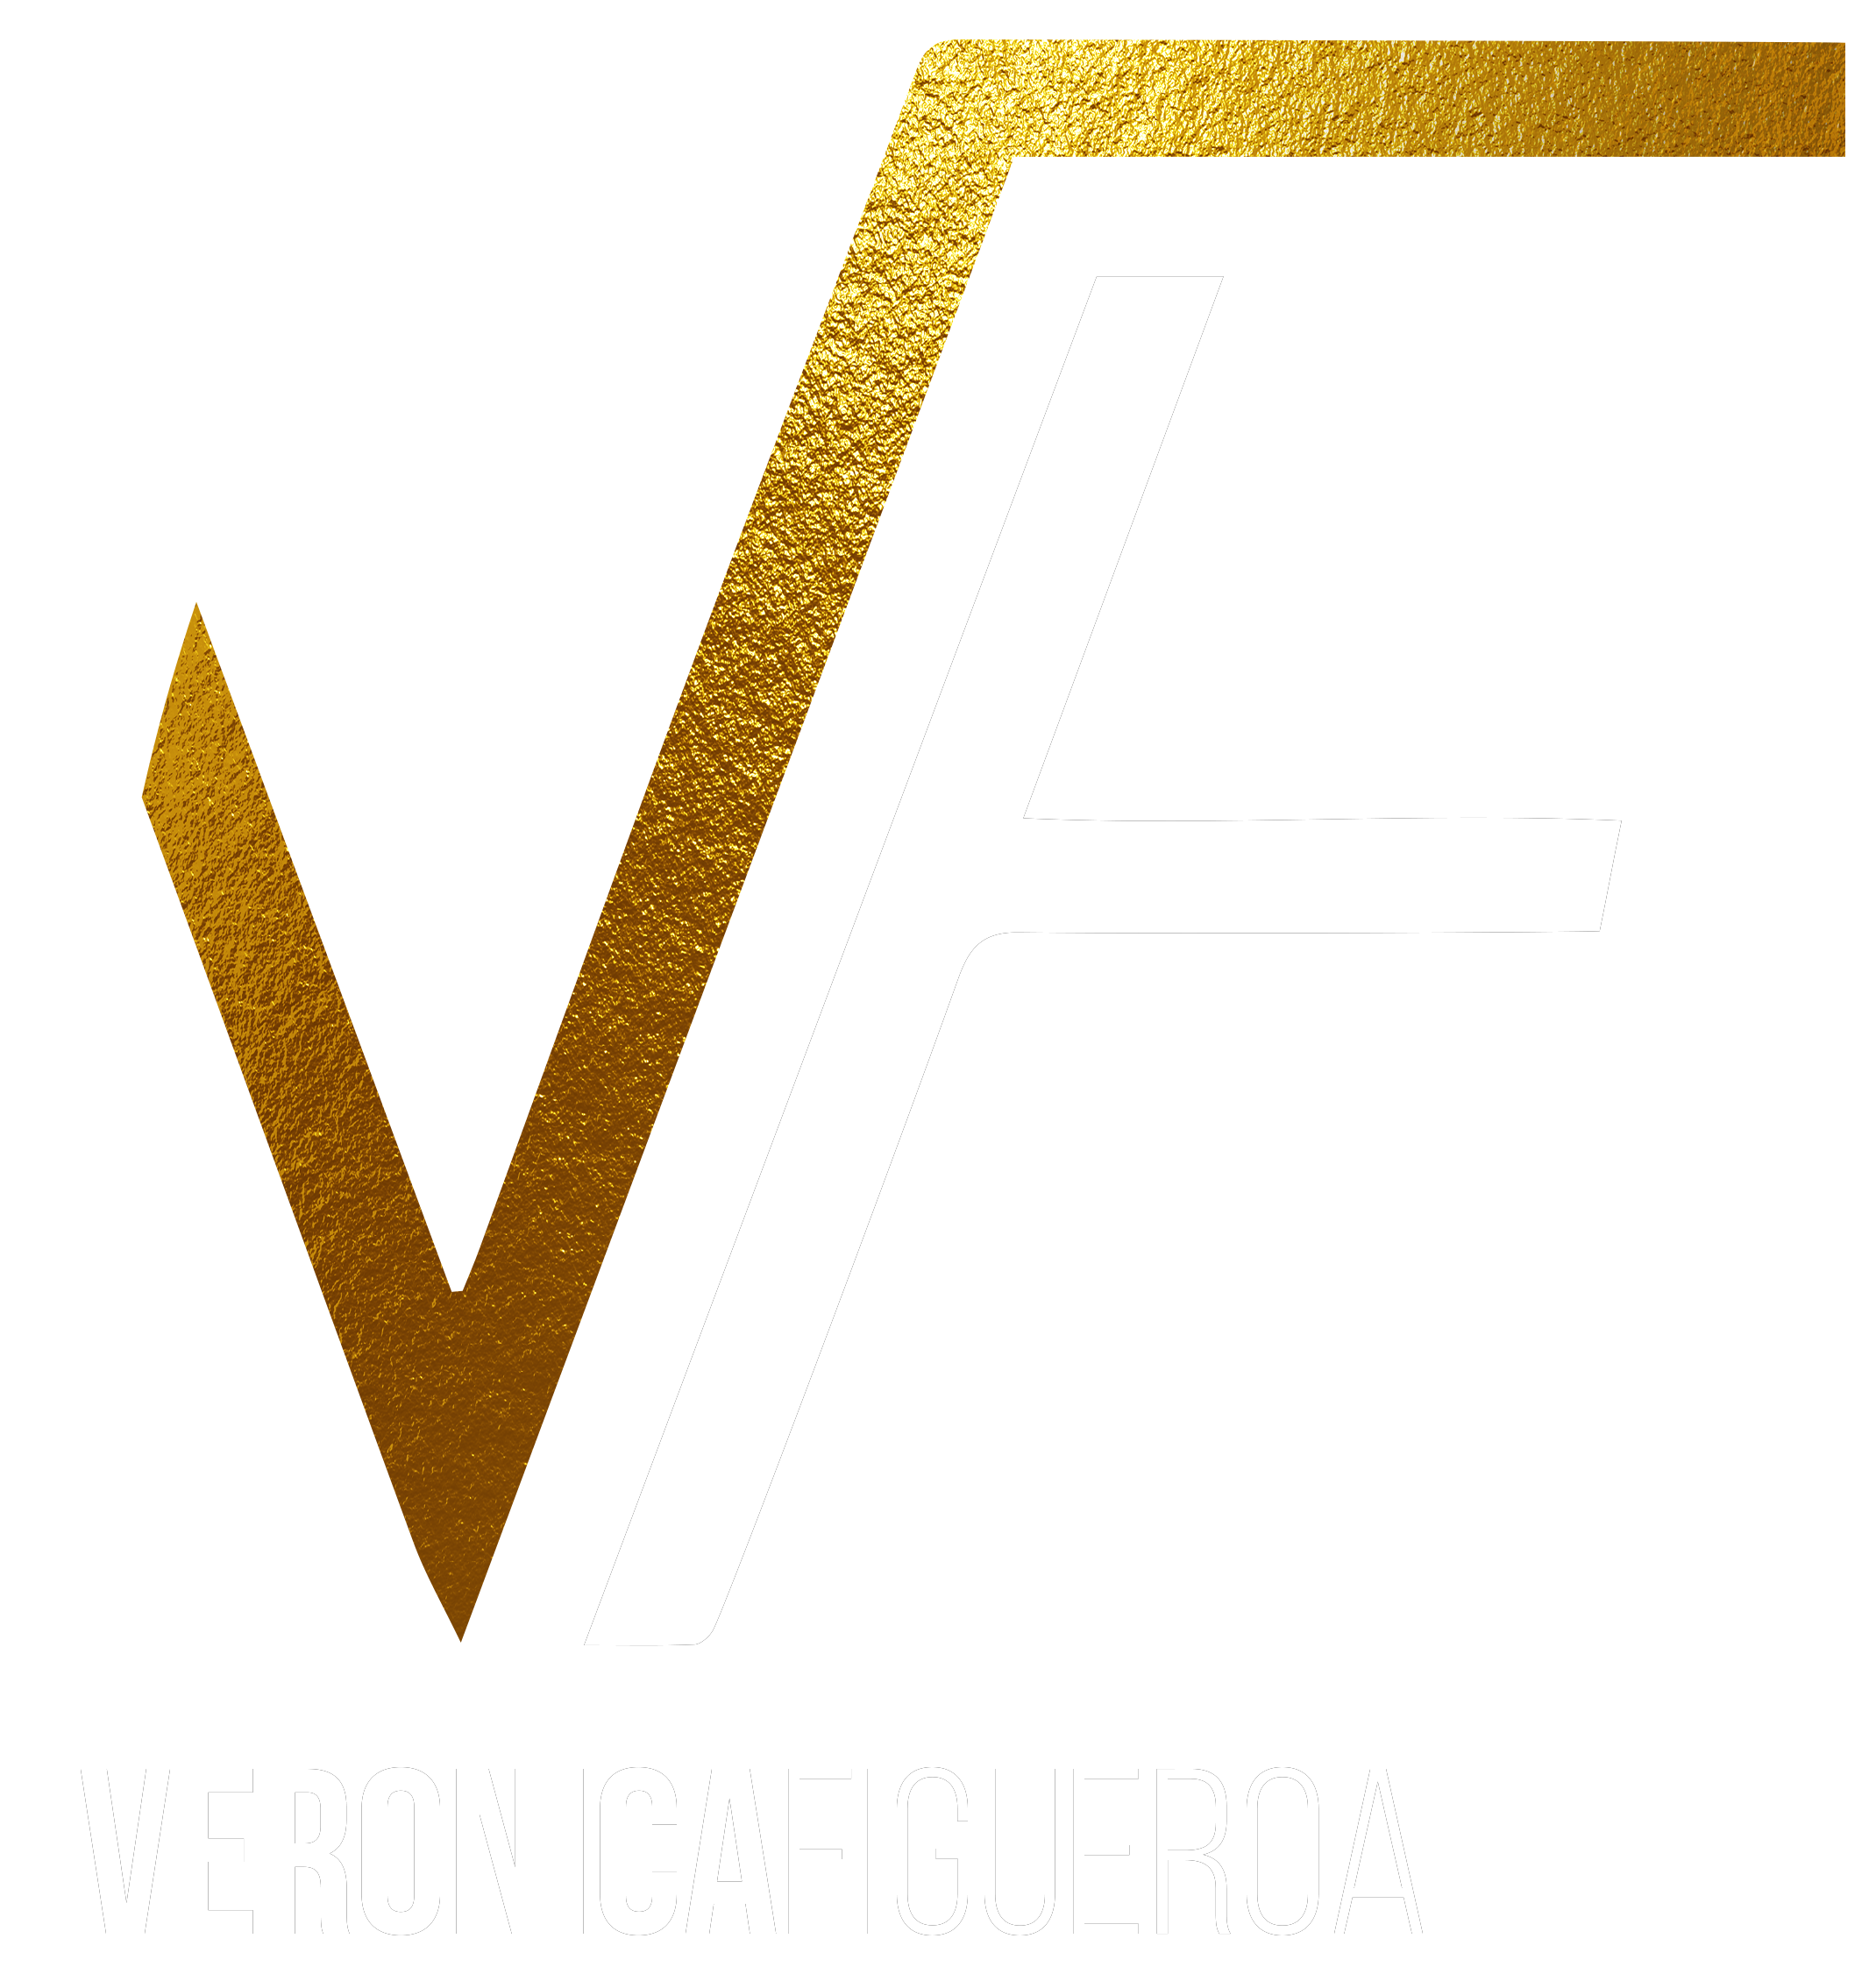 Veronica Figueroa & The Figueroa Team Brokered by eXp Realty